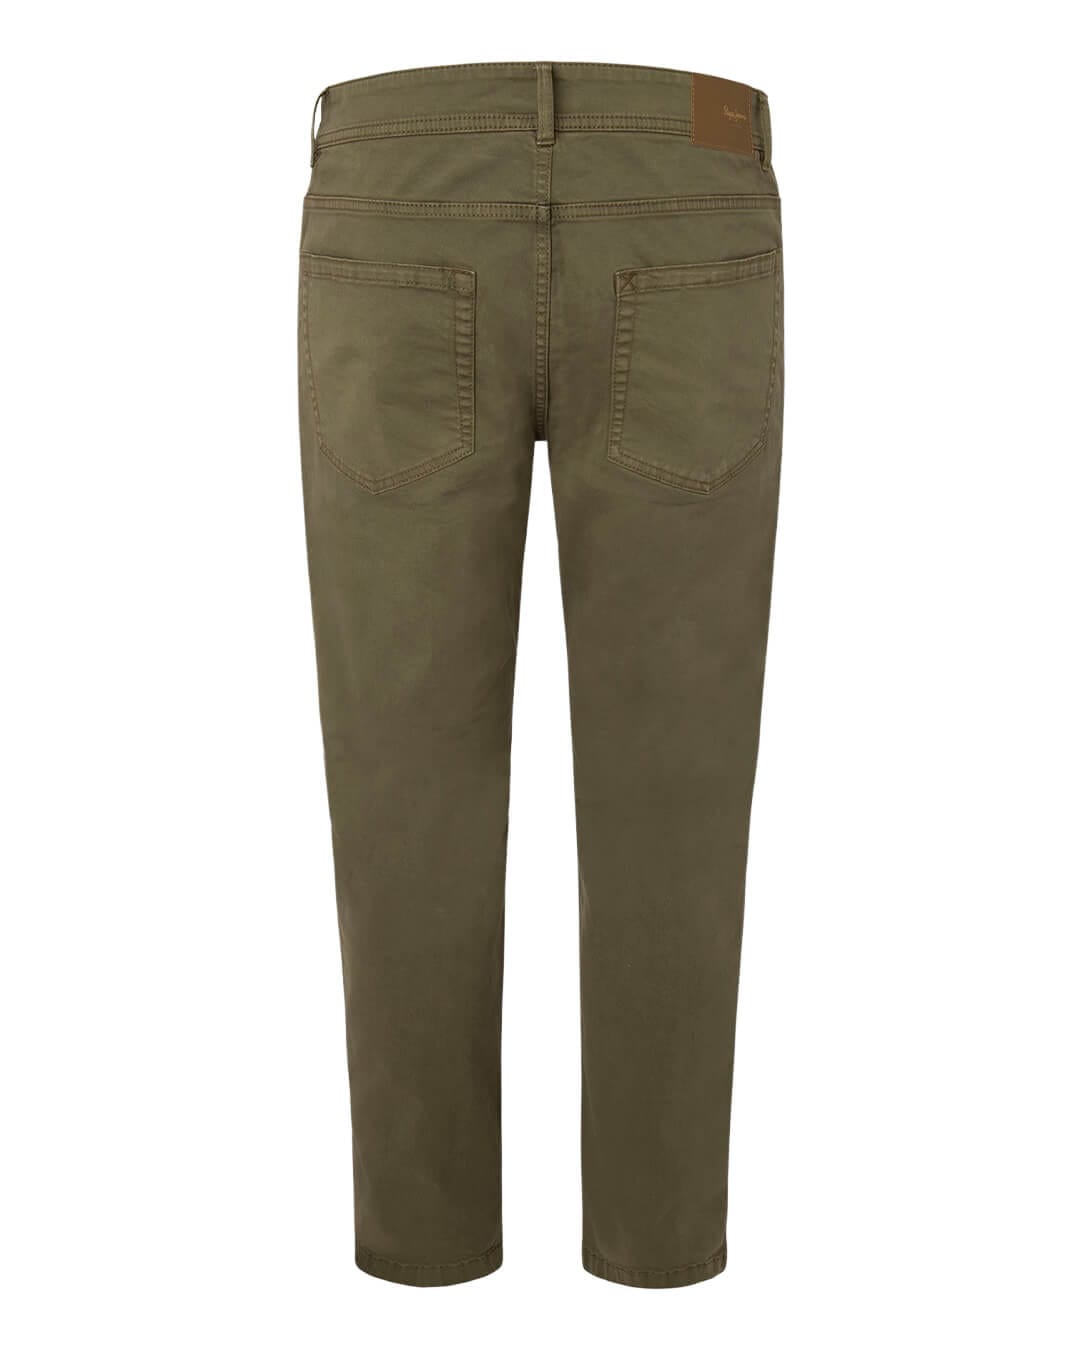 Pepe Jeans Trousers Pepe Jeans Green Slim Fit Five Pocket Trousers